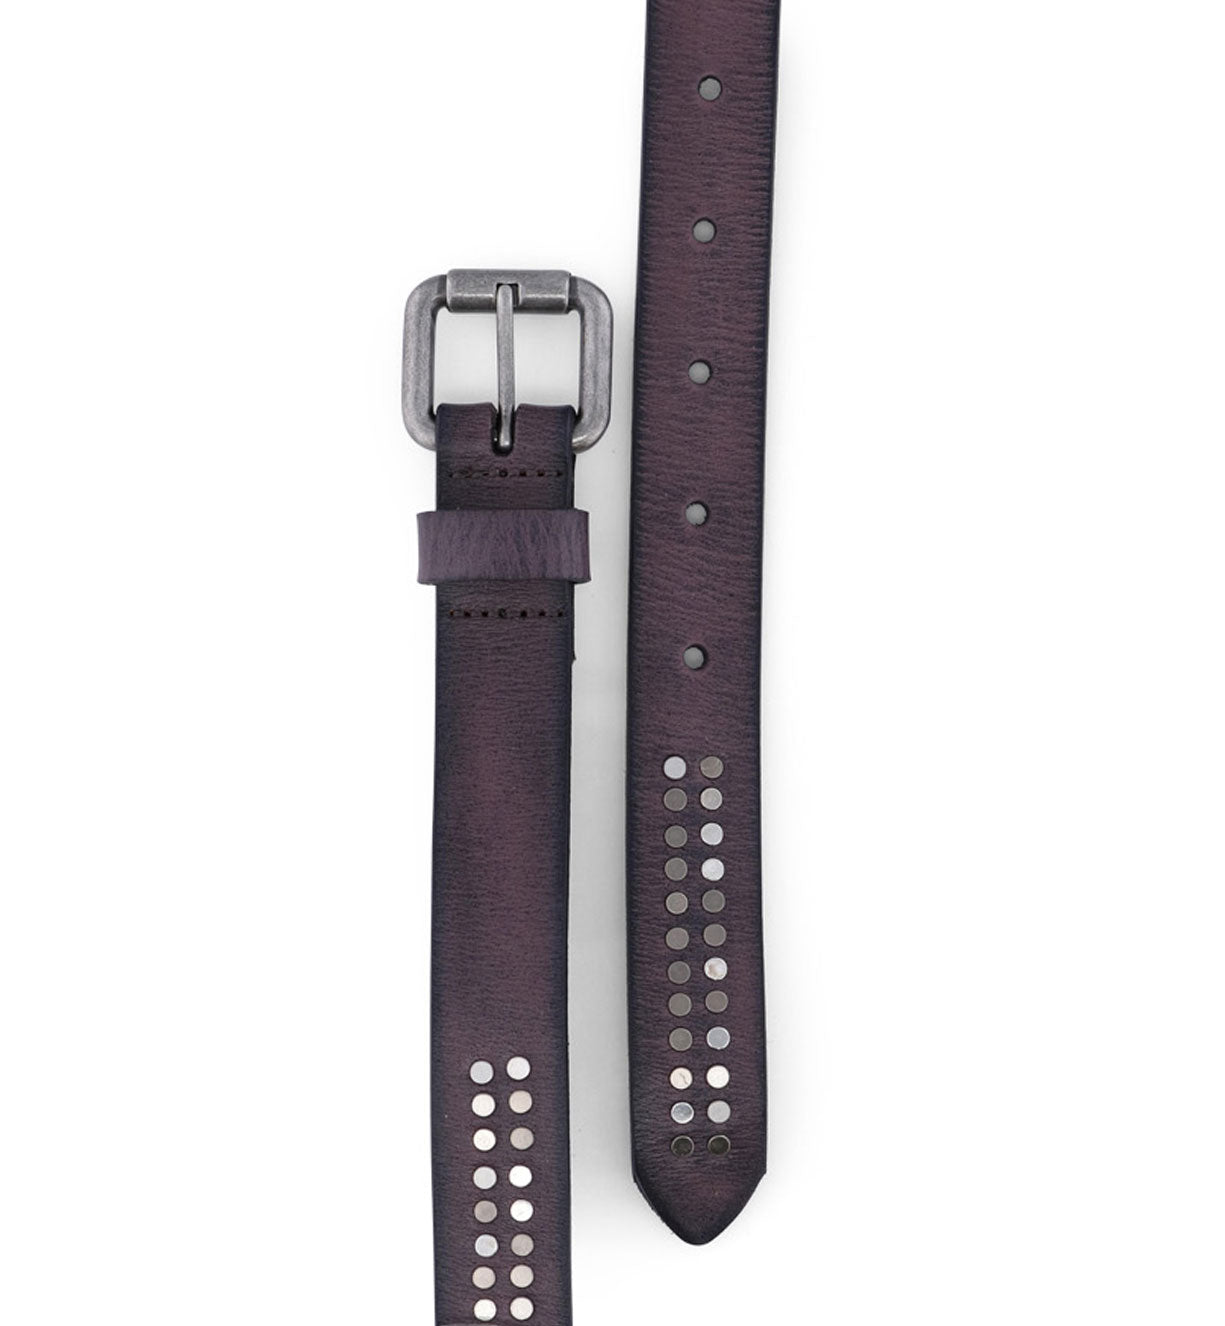 A Lucy purple leather belt with studs on it from Bed Stu.